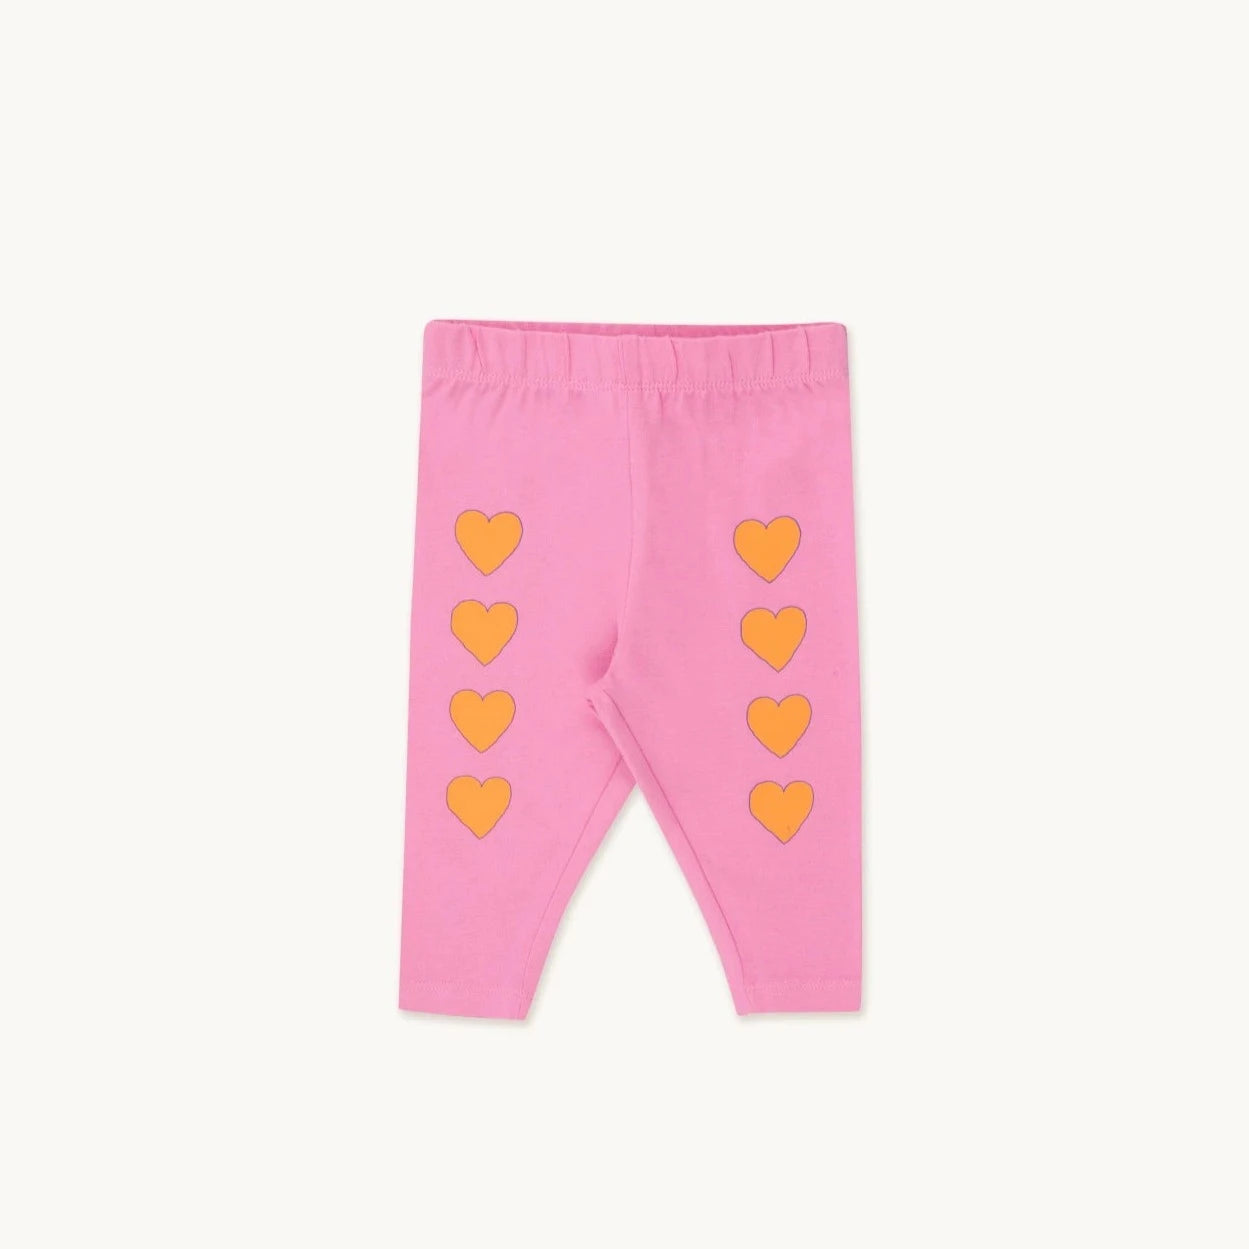 Tiny Cottons - Hearts Legging (Baby)